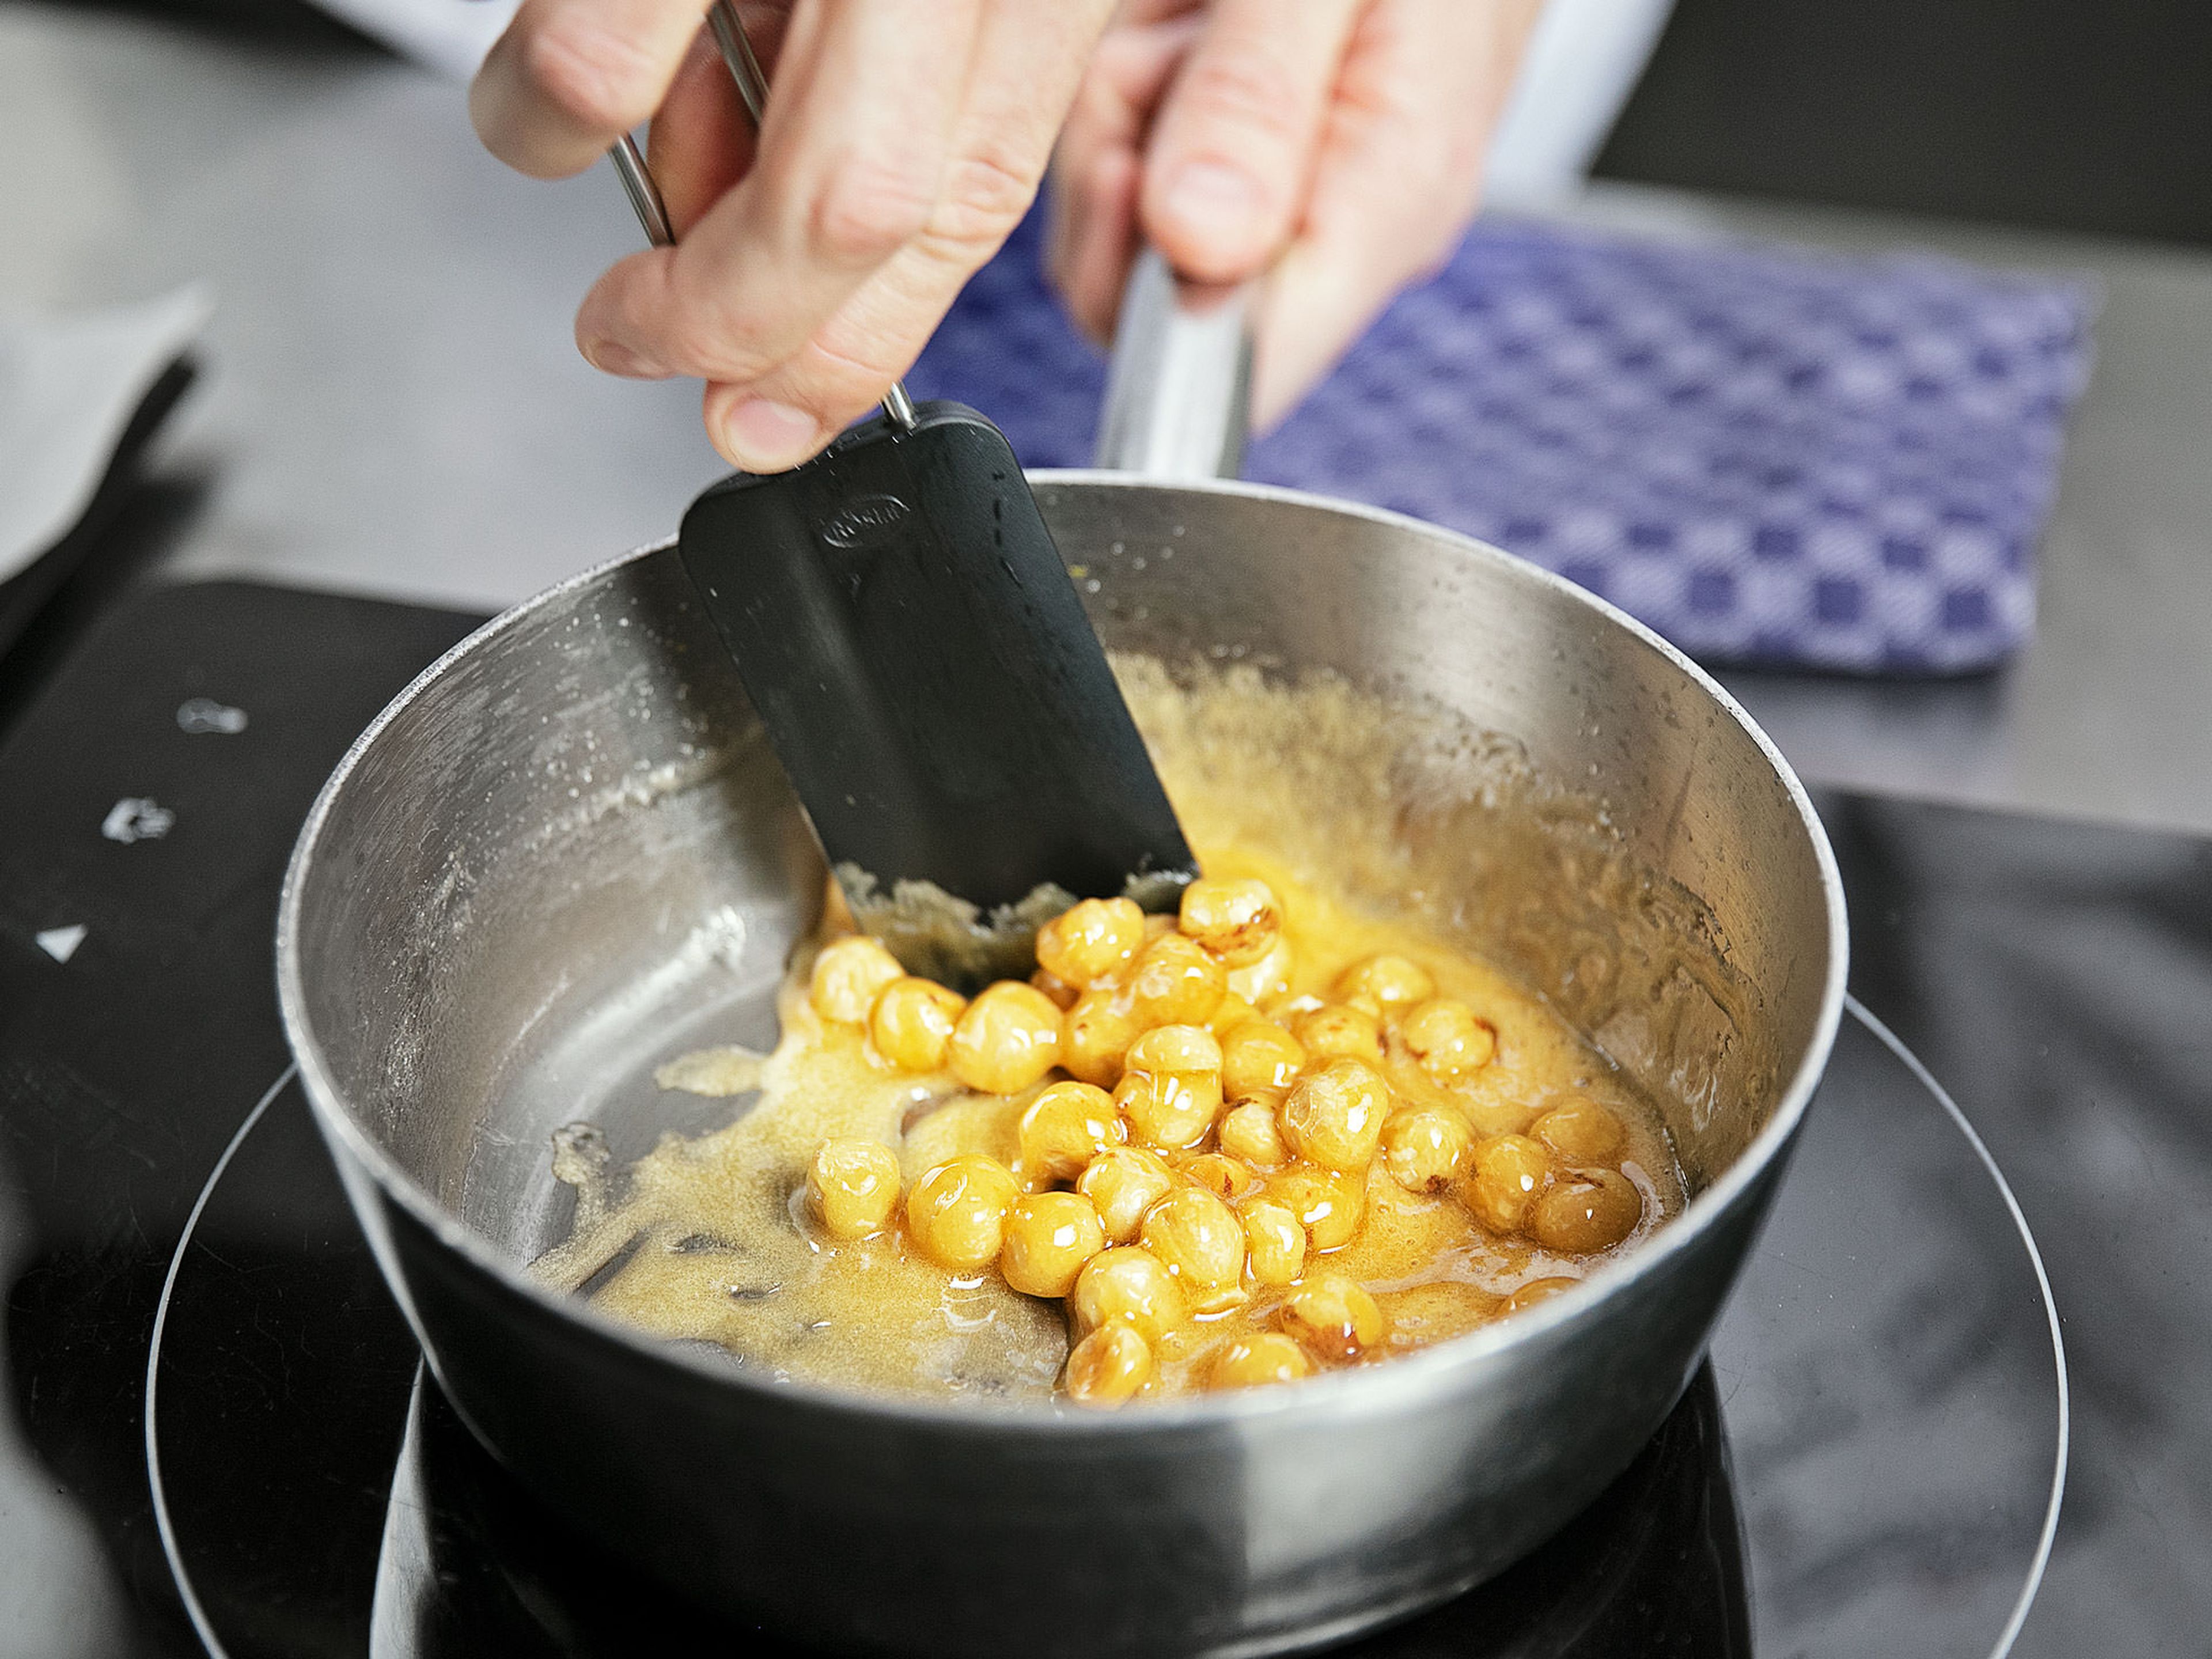 Stir in baking powder and remaining whole hazelnuts, then transfer to a baking sheet and allow to cool. For the orange filling, grate oranges and set zests aside. Crush lemongrass stalk, chop, and transfer to a small saucepan. Grind cardamom pod, coriander seeds, clove, and star anise in a mortar and transfer to the saucepan. Juice oranges, add juice to saucepan and bring to a simmer. Let reduce, then strain through a sieve and transfer back to the saucepan.